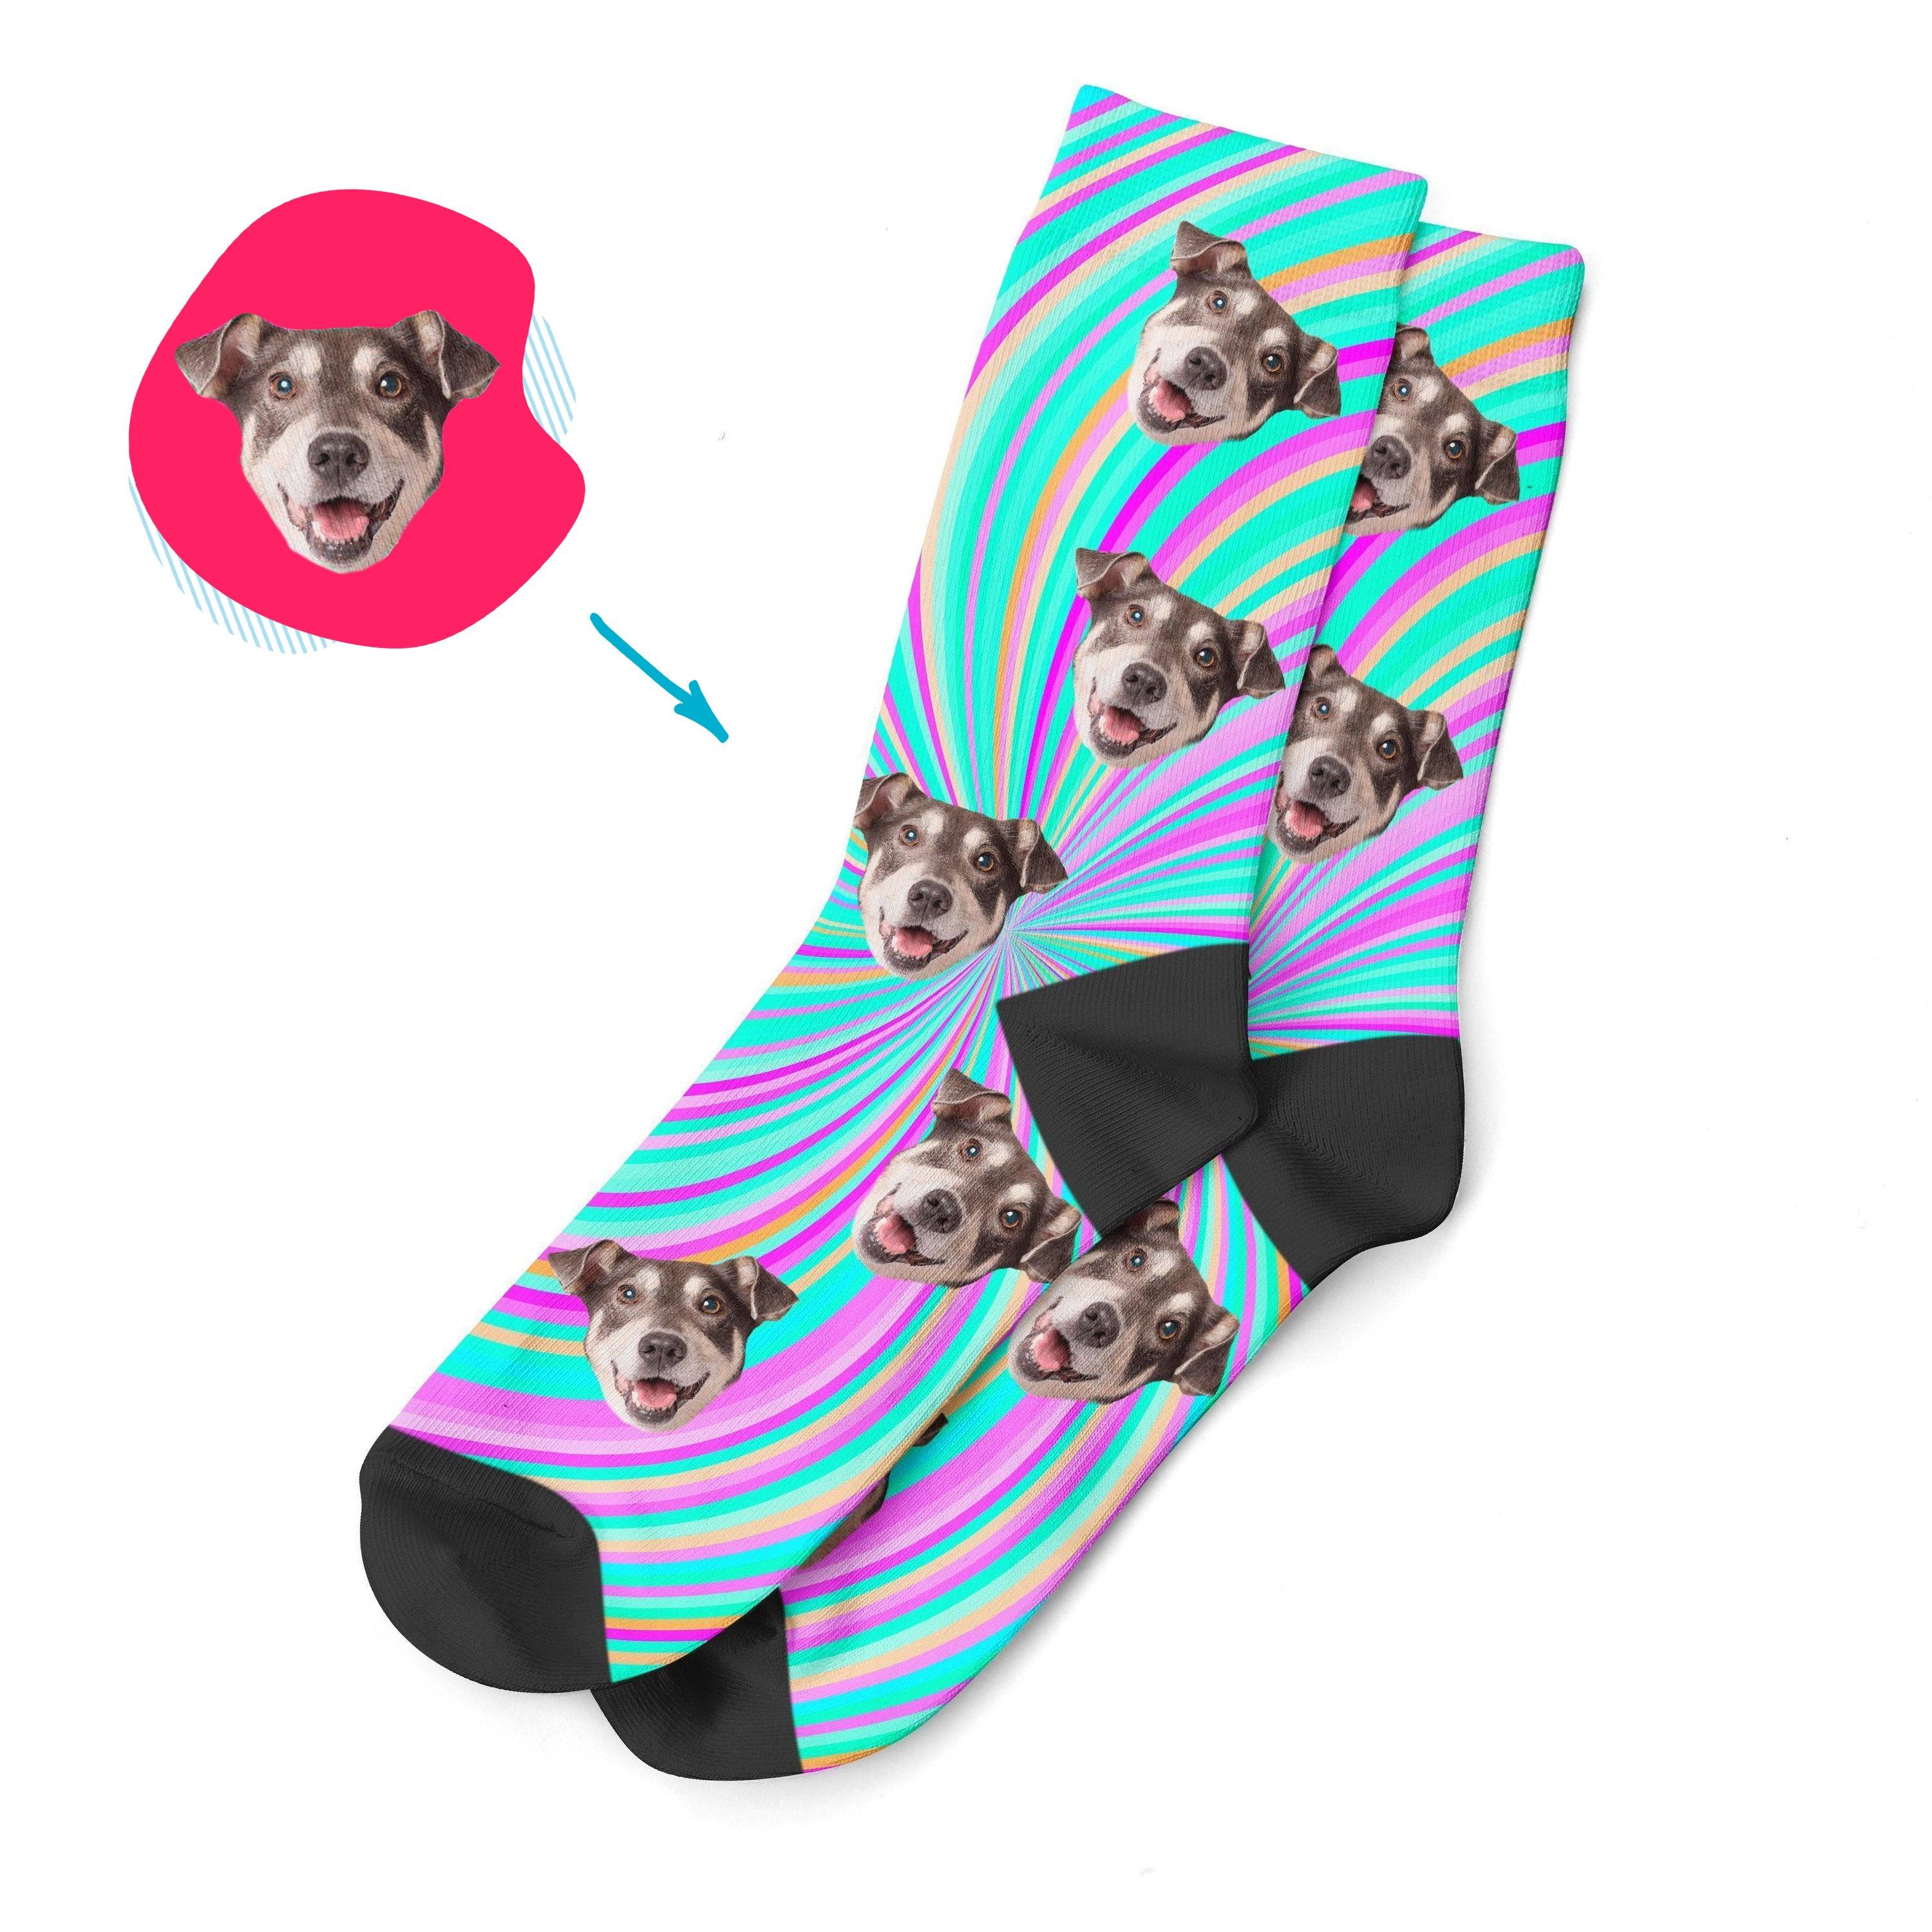 fantasy Fantasy socks personalized with photo of face printed on them